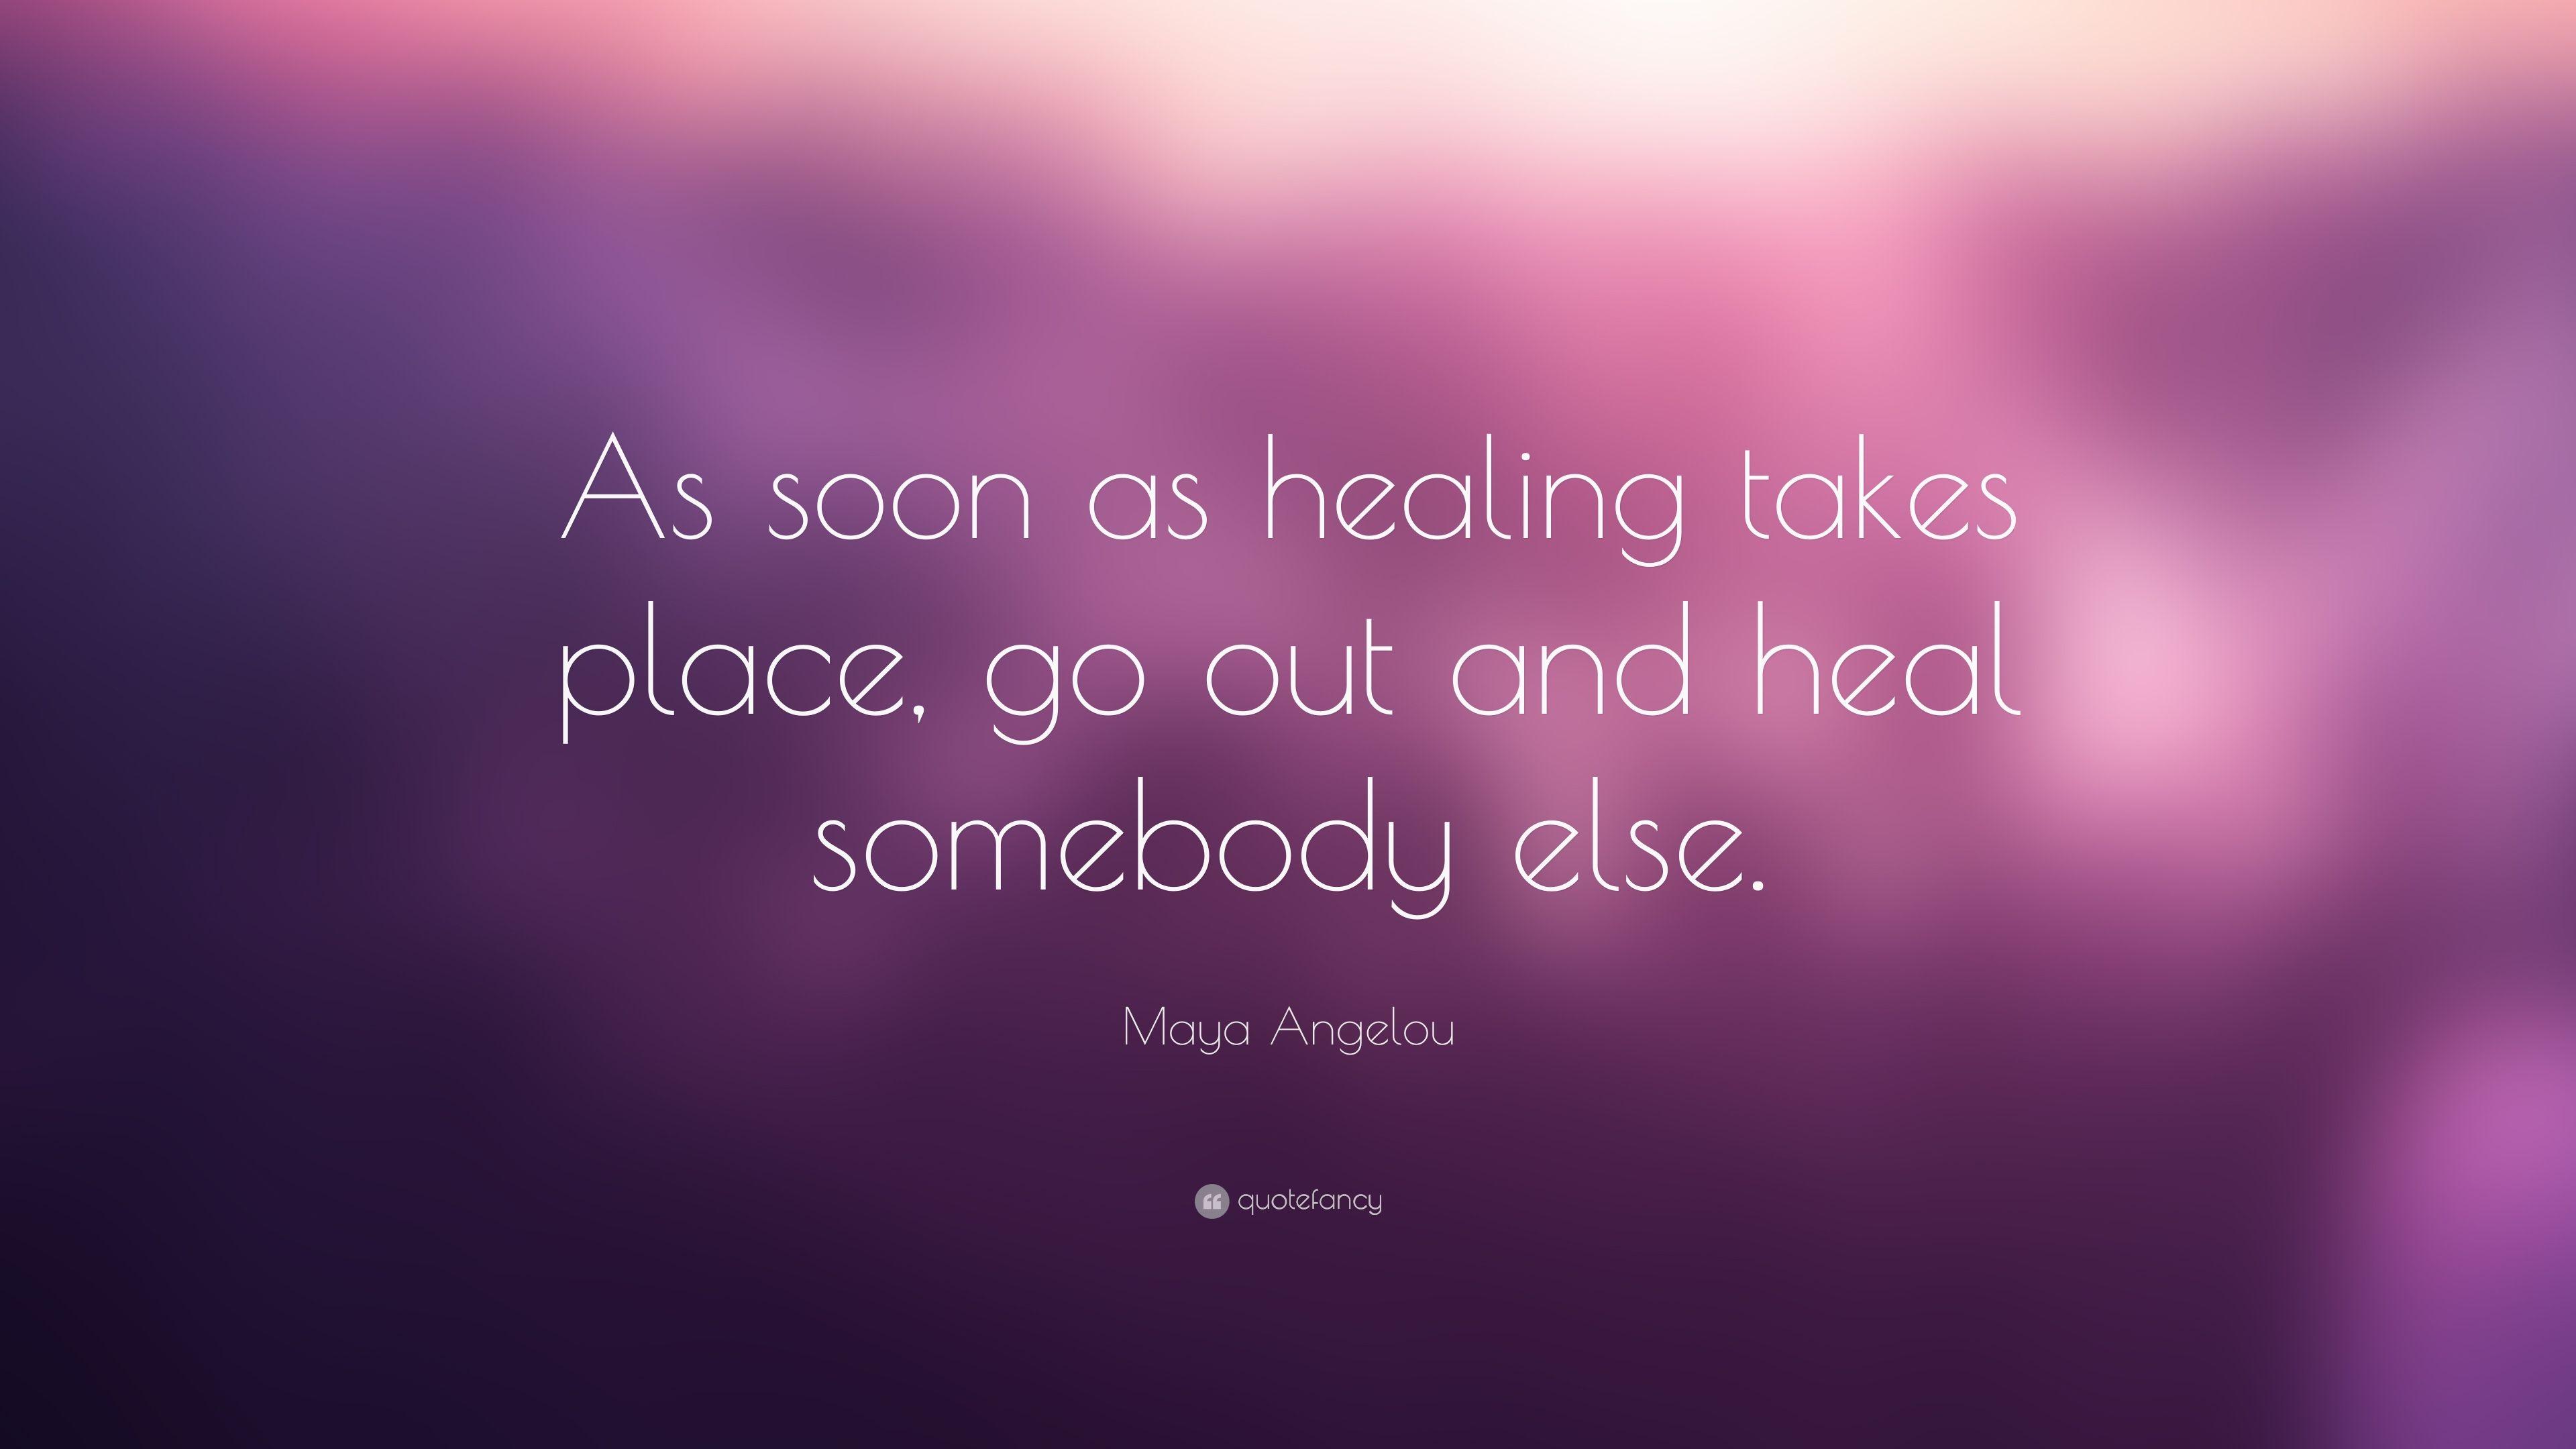 Maya Angelou Quote: “As soon as healing takes place, go out